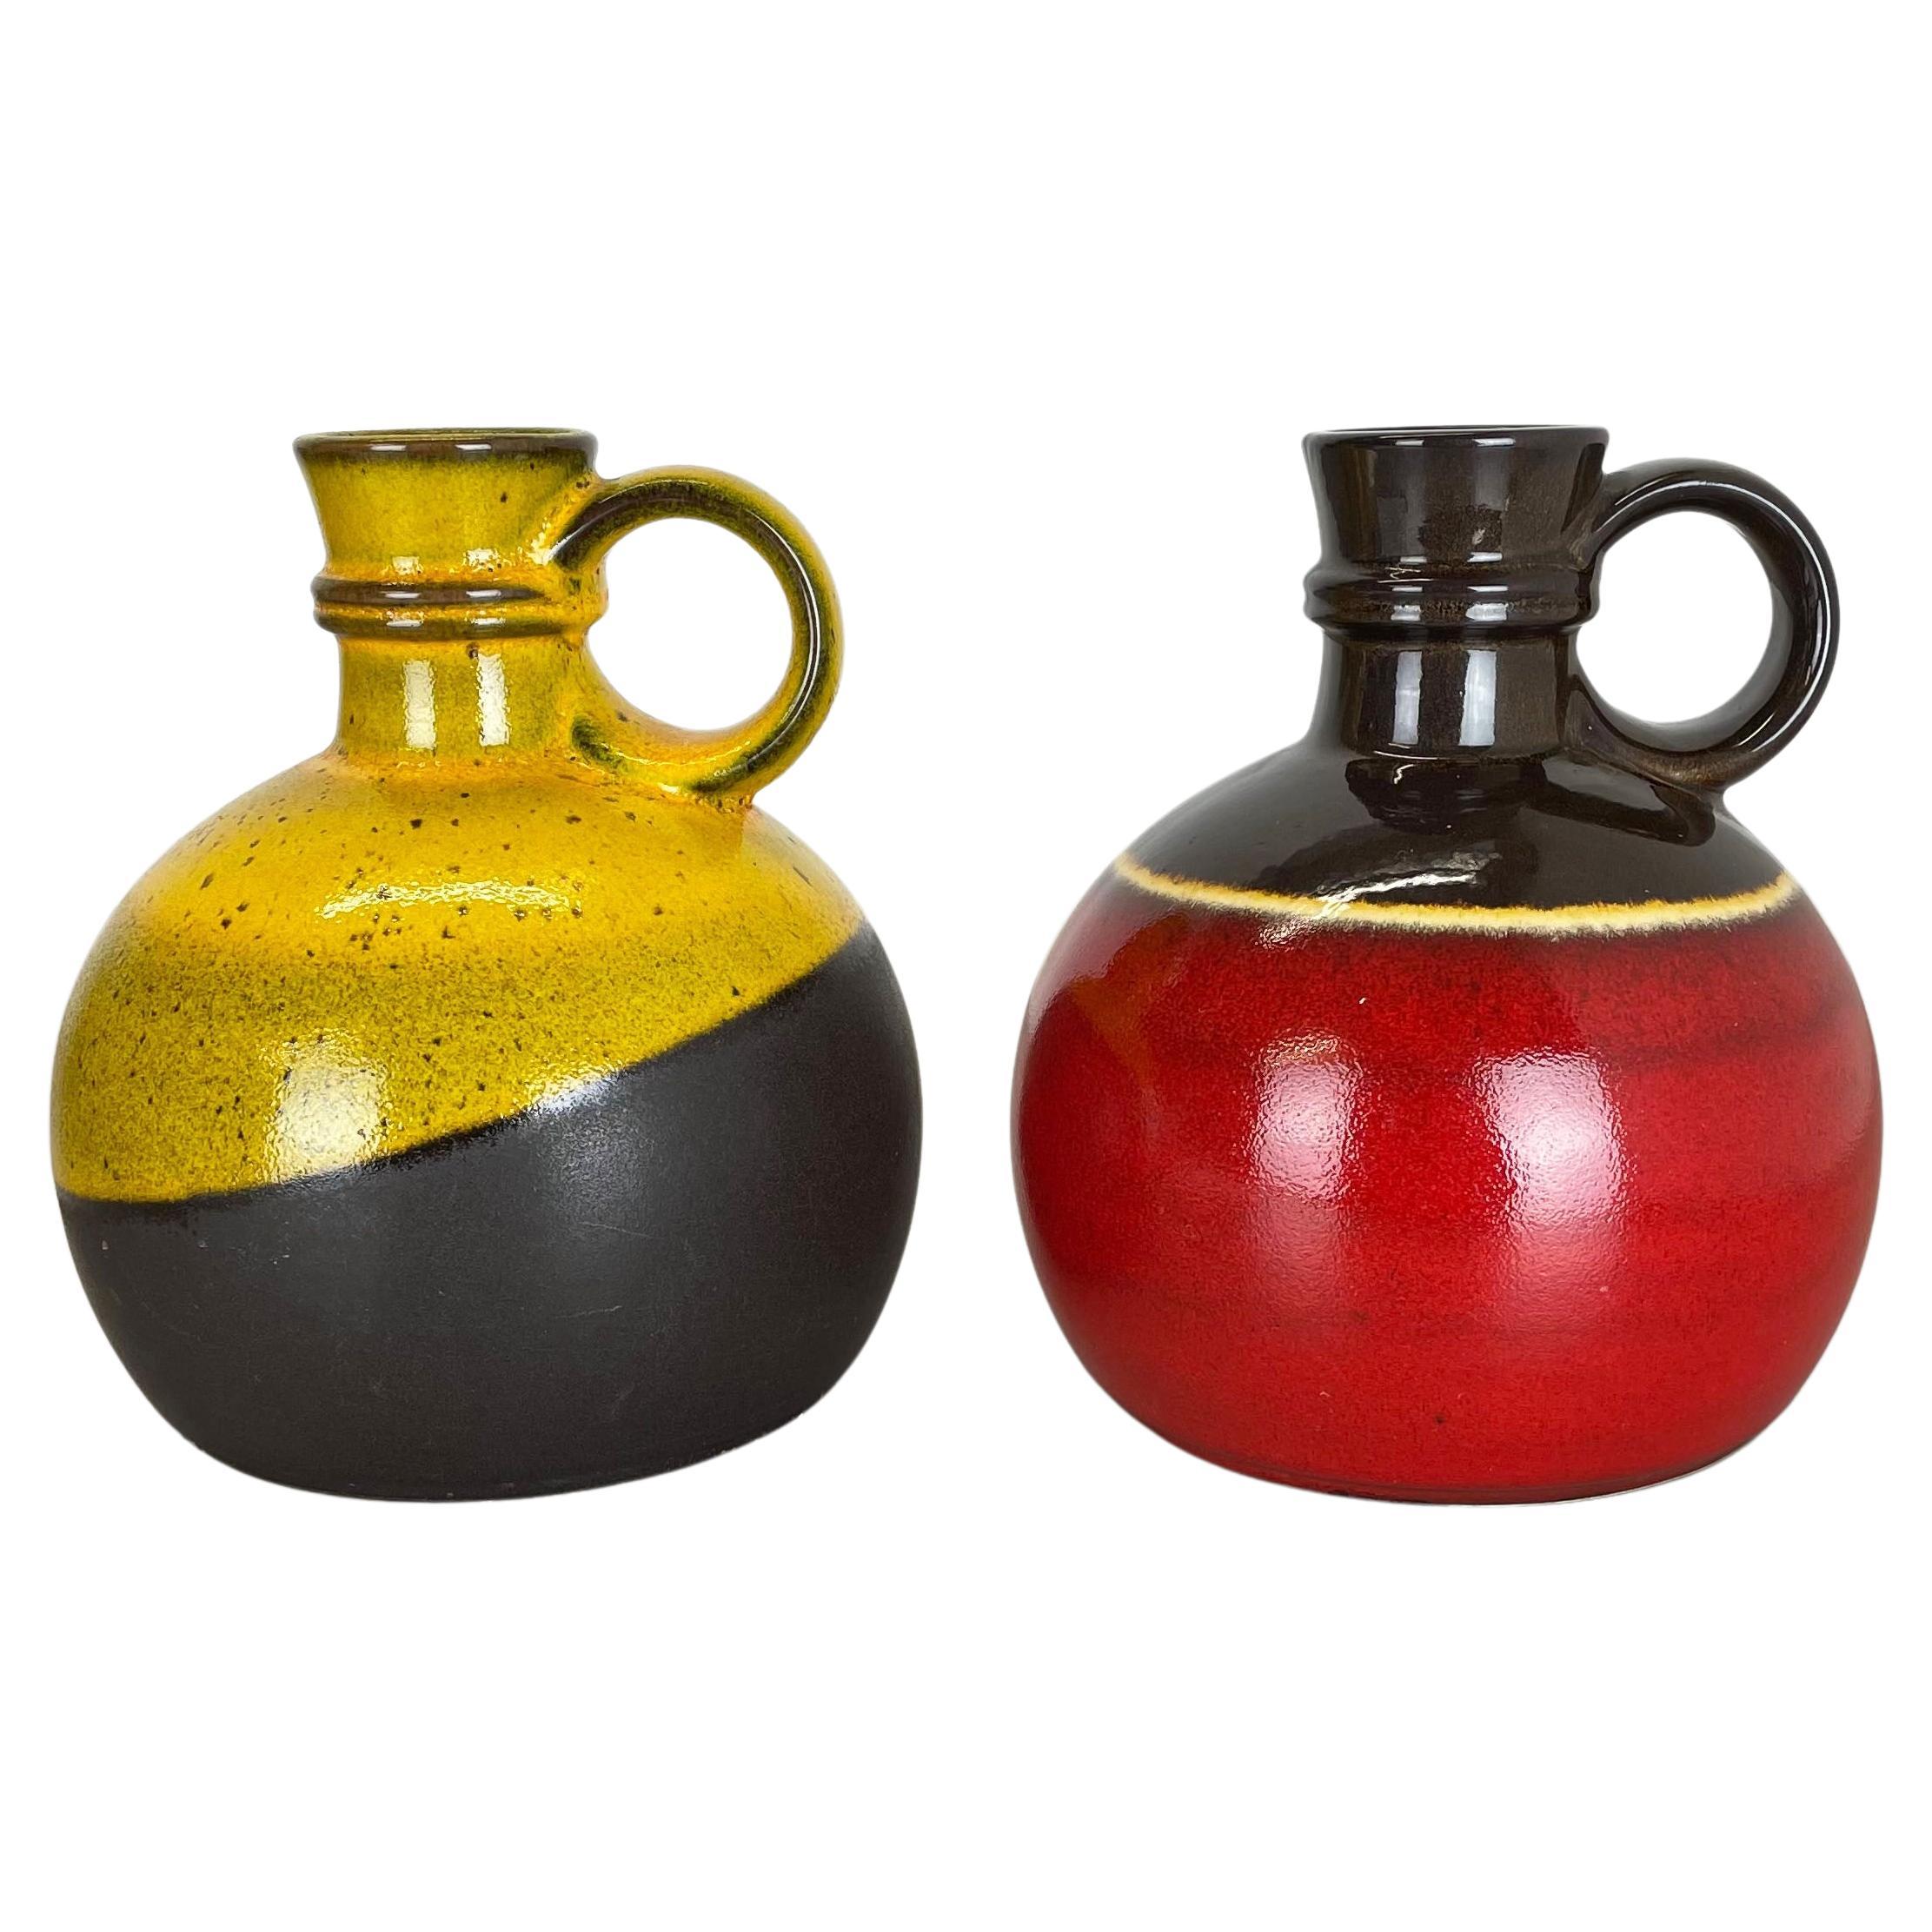 Set of Two Pottery Vases "red yellow" Objects by Steuler Ceramics Germany, 1970s